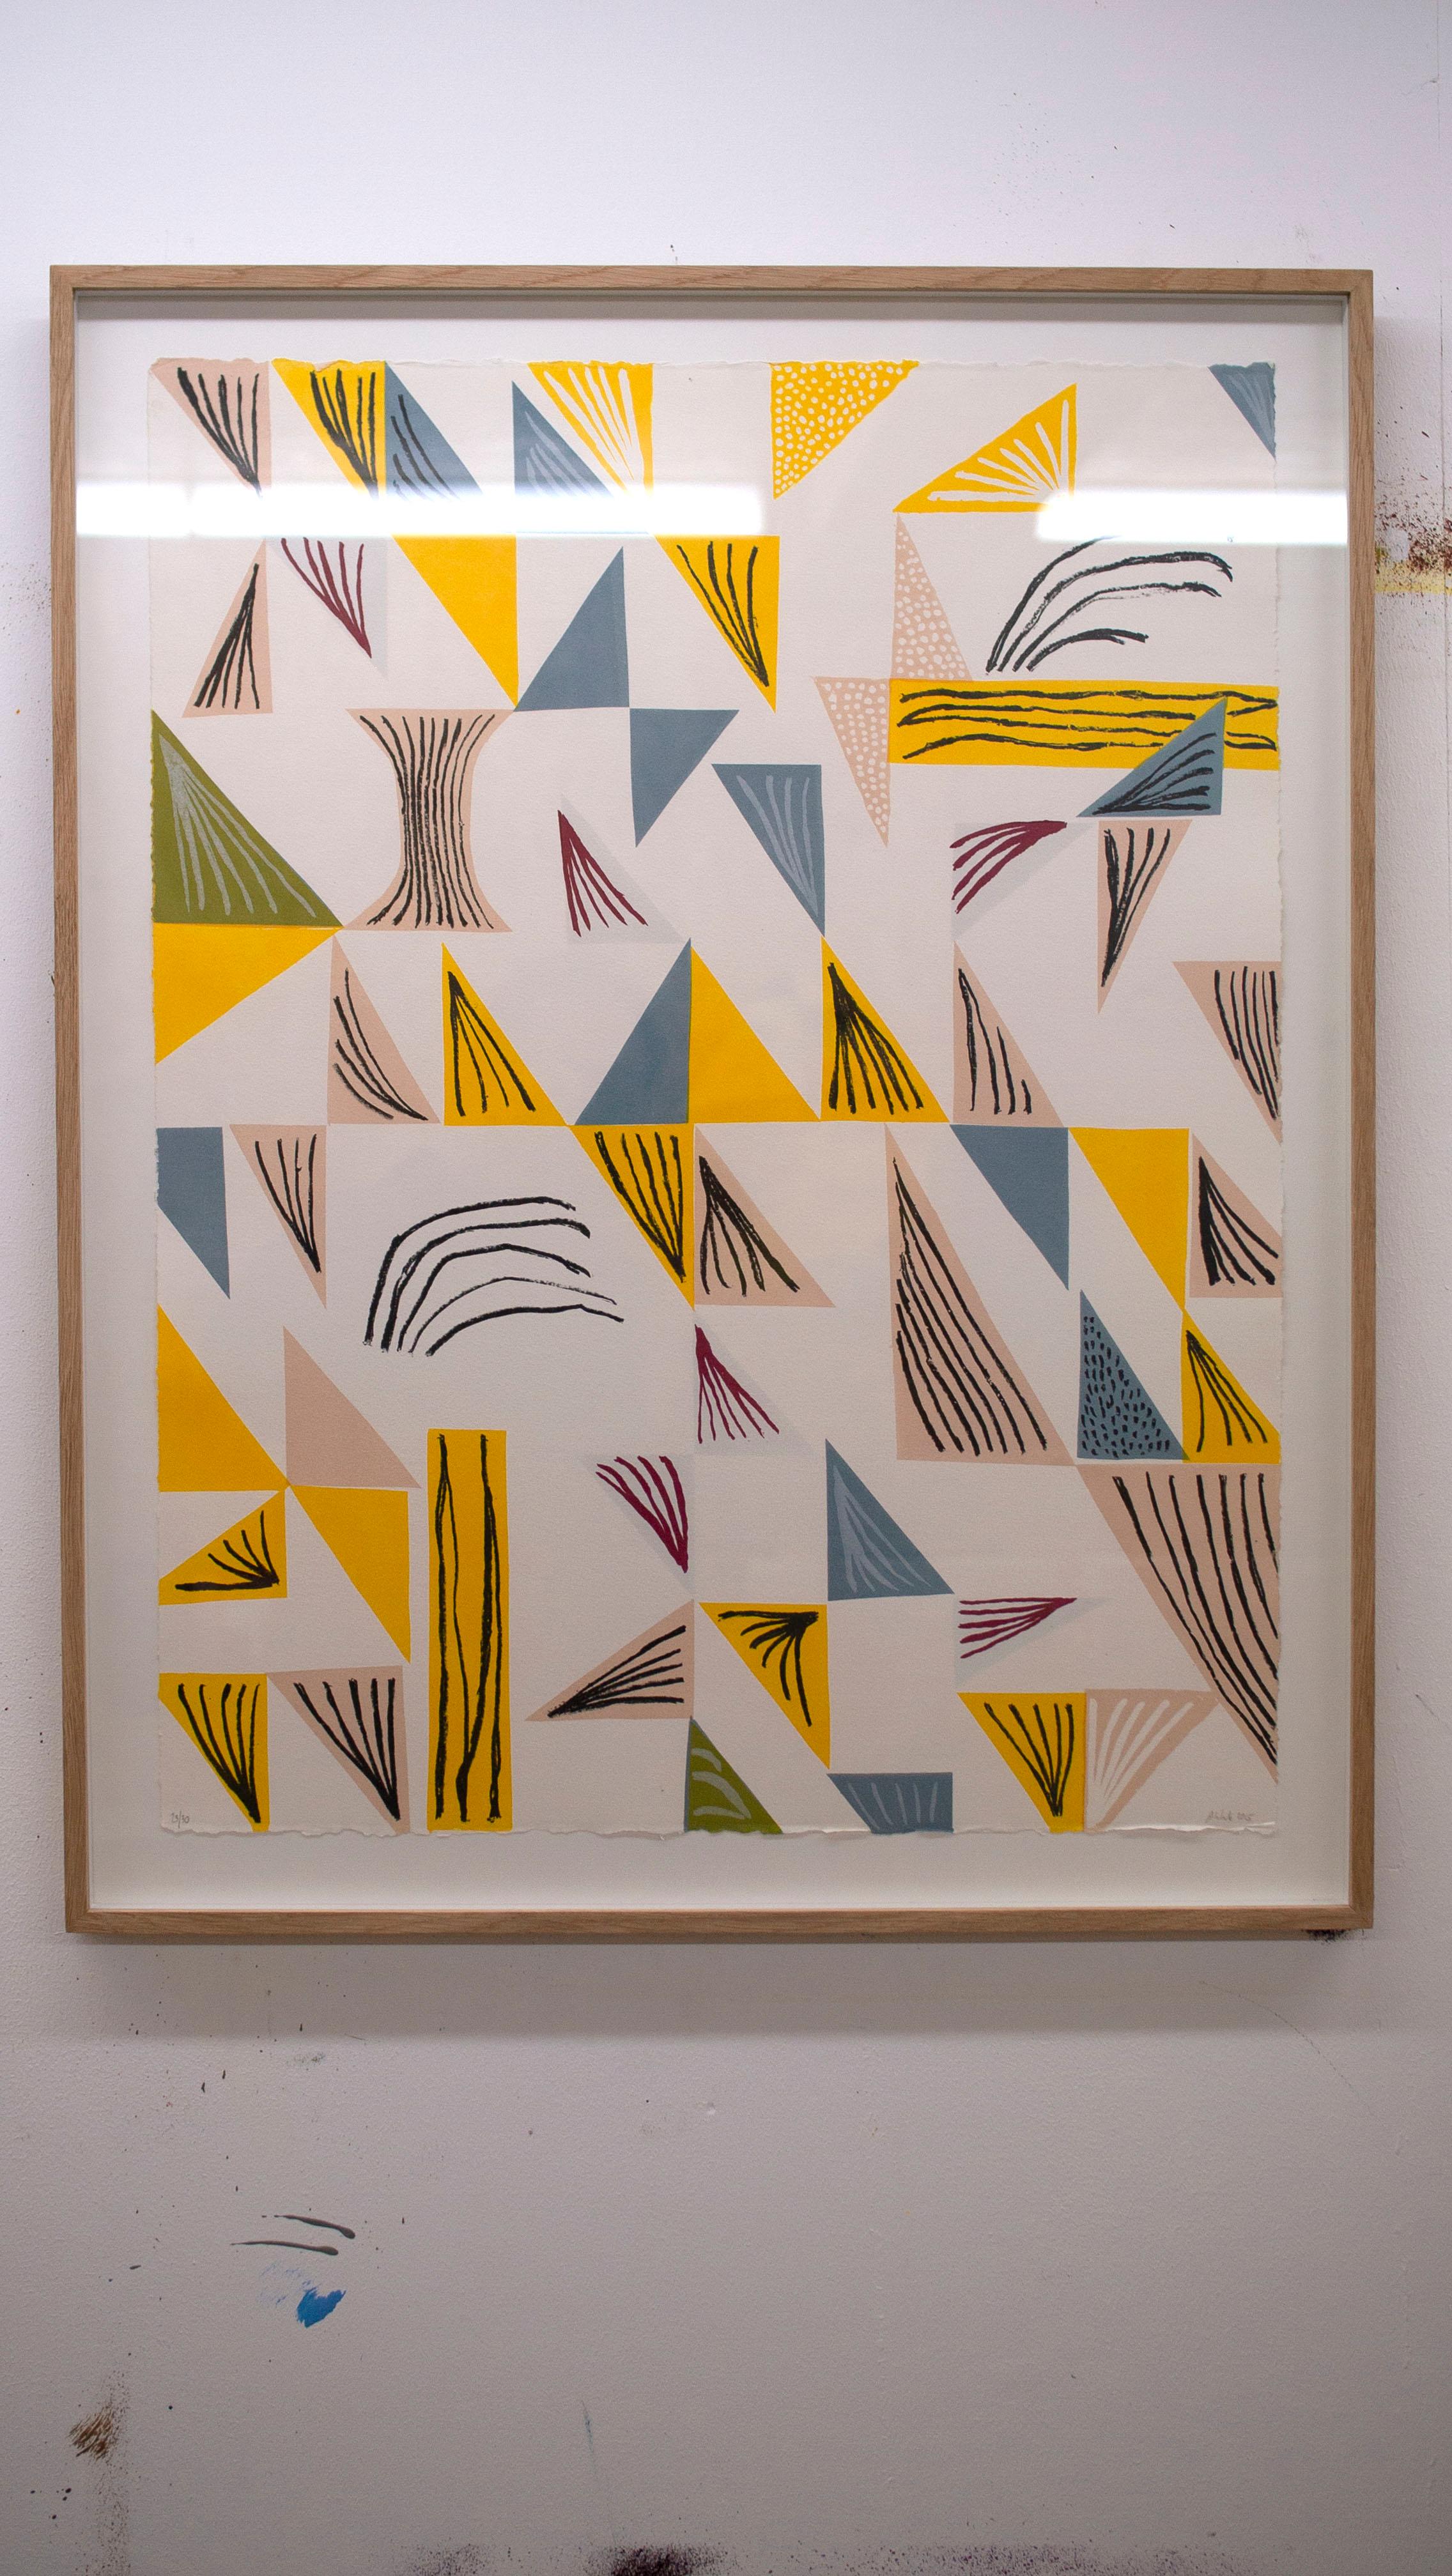 Geometric Abstraction #1 - Print by Anthony White